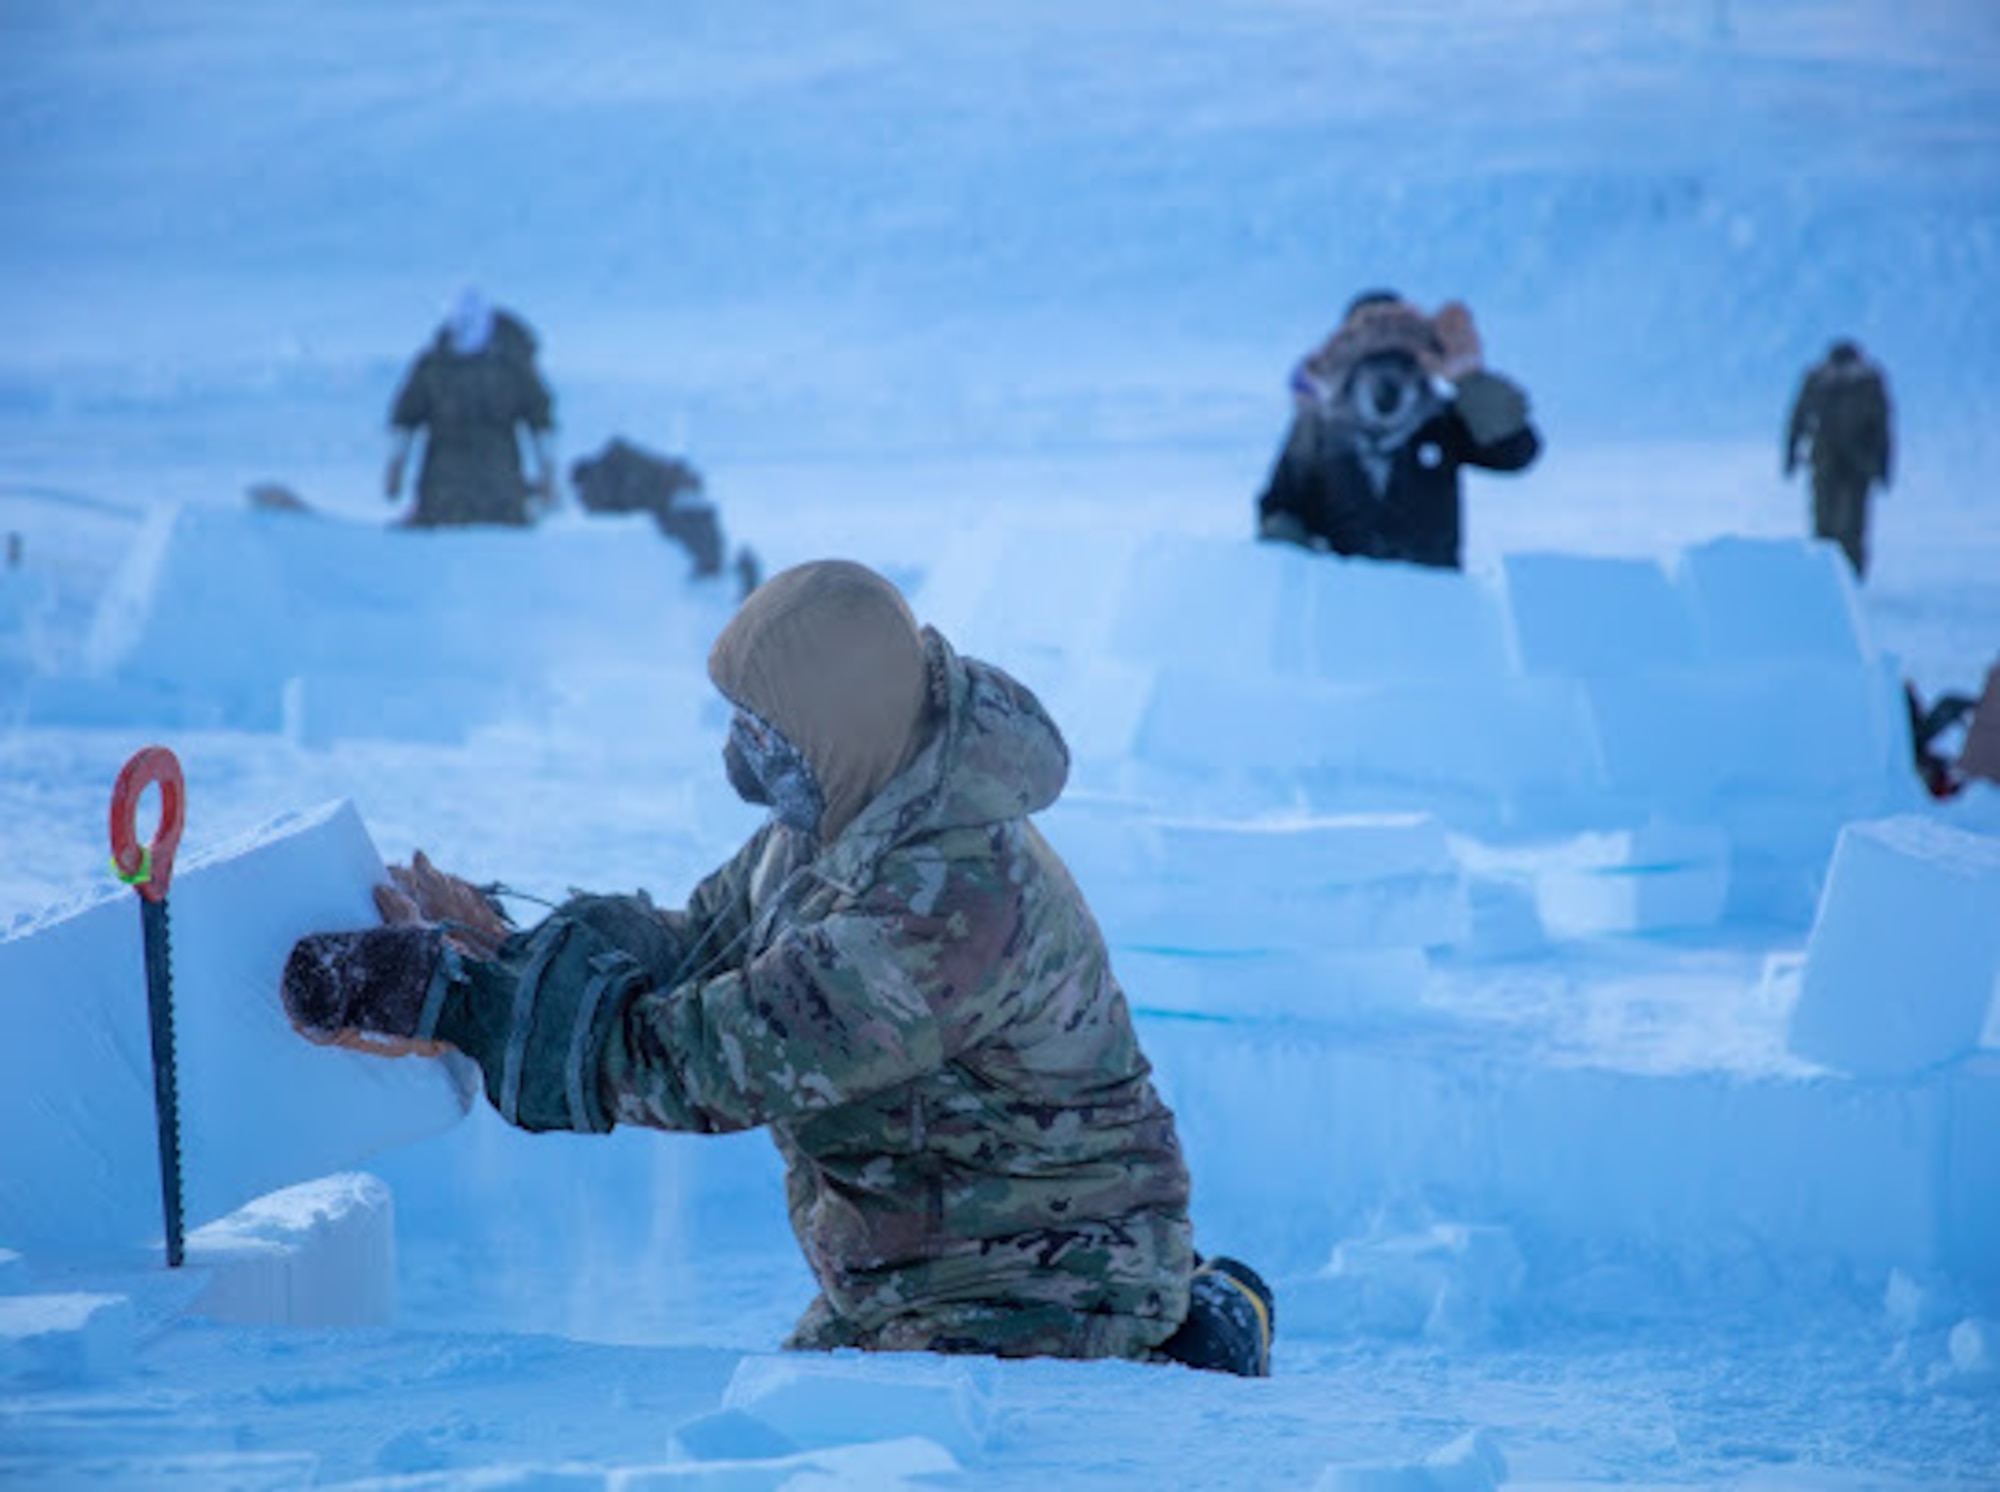 U.S. Air Force Chief Master Sgt. Jeremiah Wickenhauser cuts snow blocks to be used in igloo constriction in Crystal City, Canada.